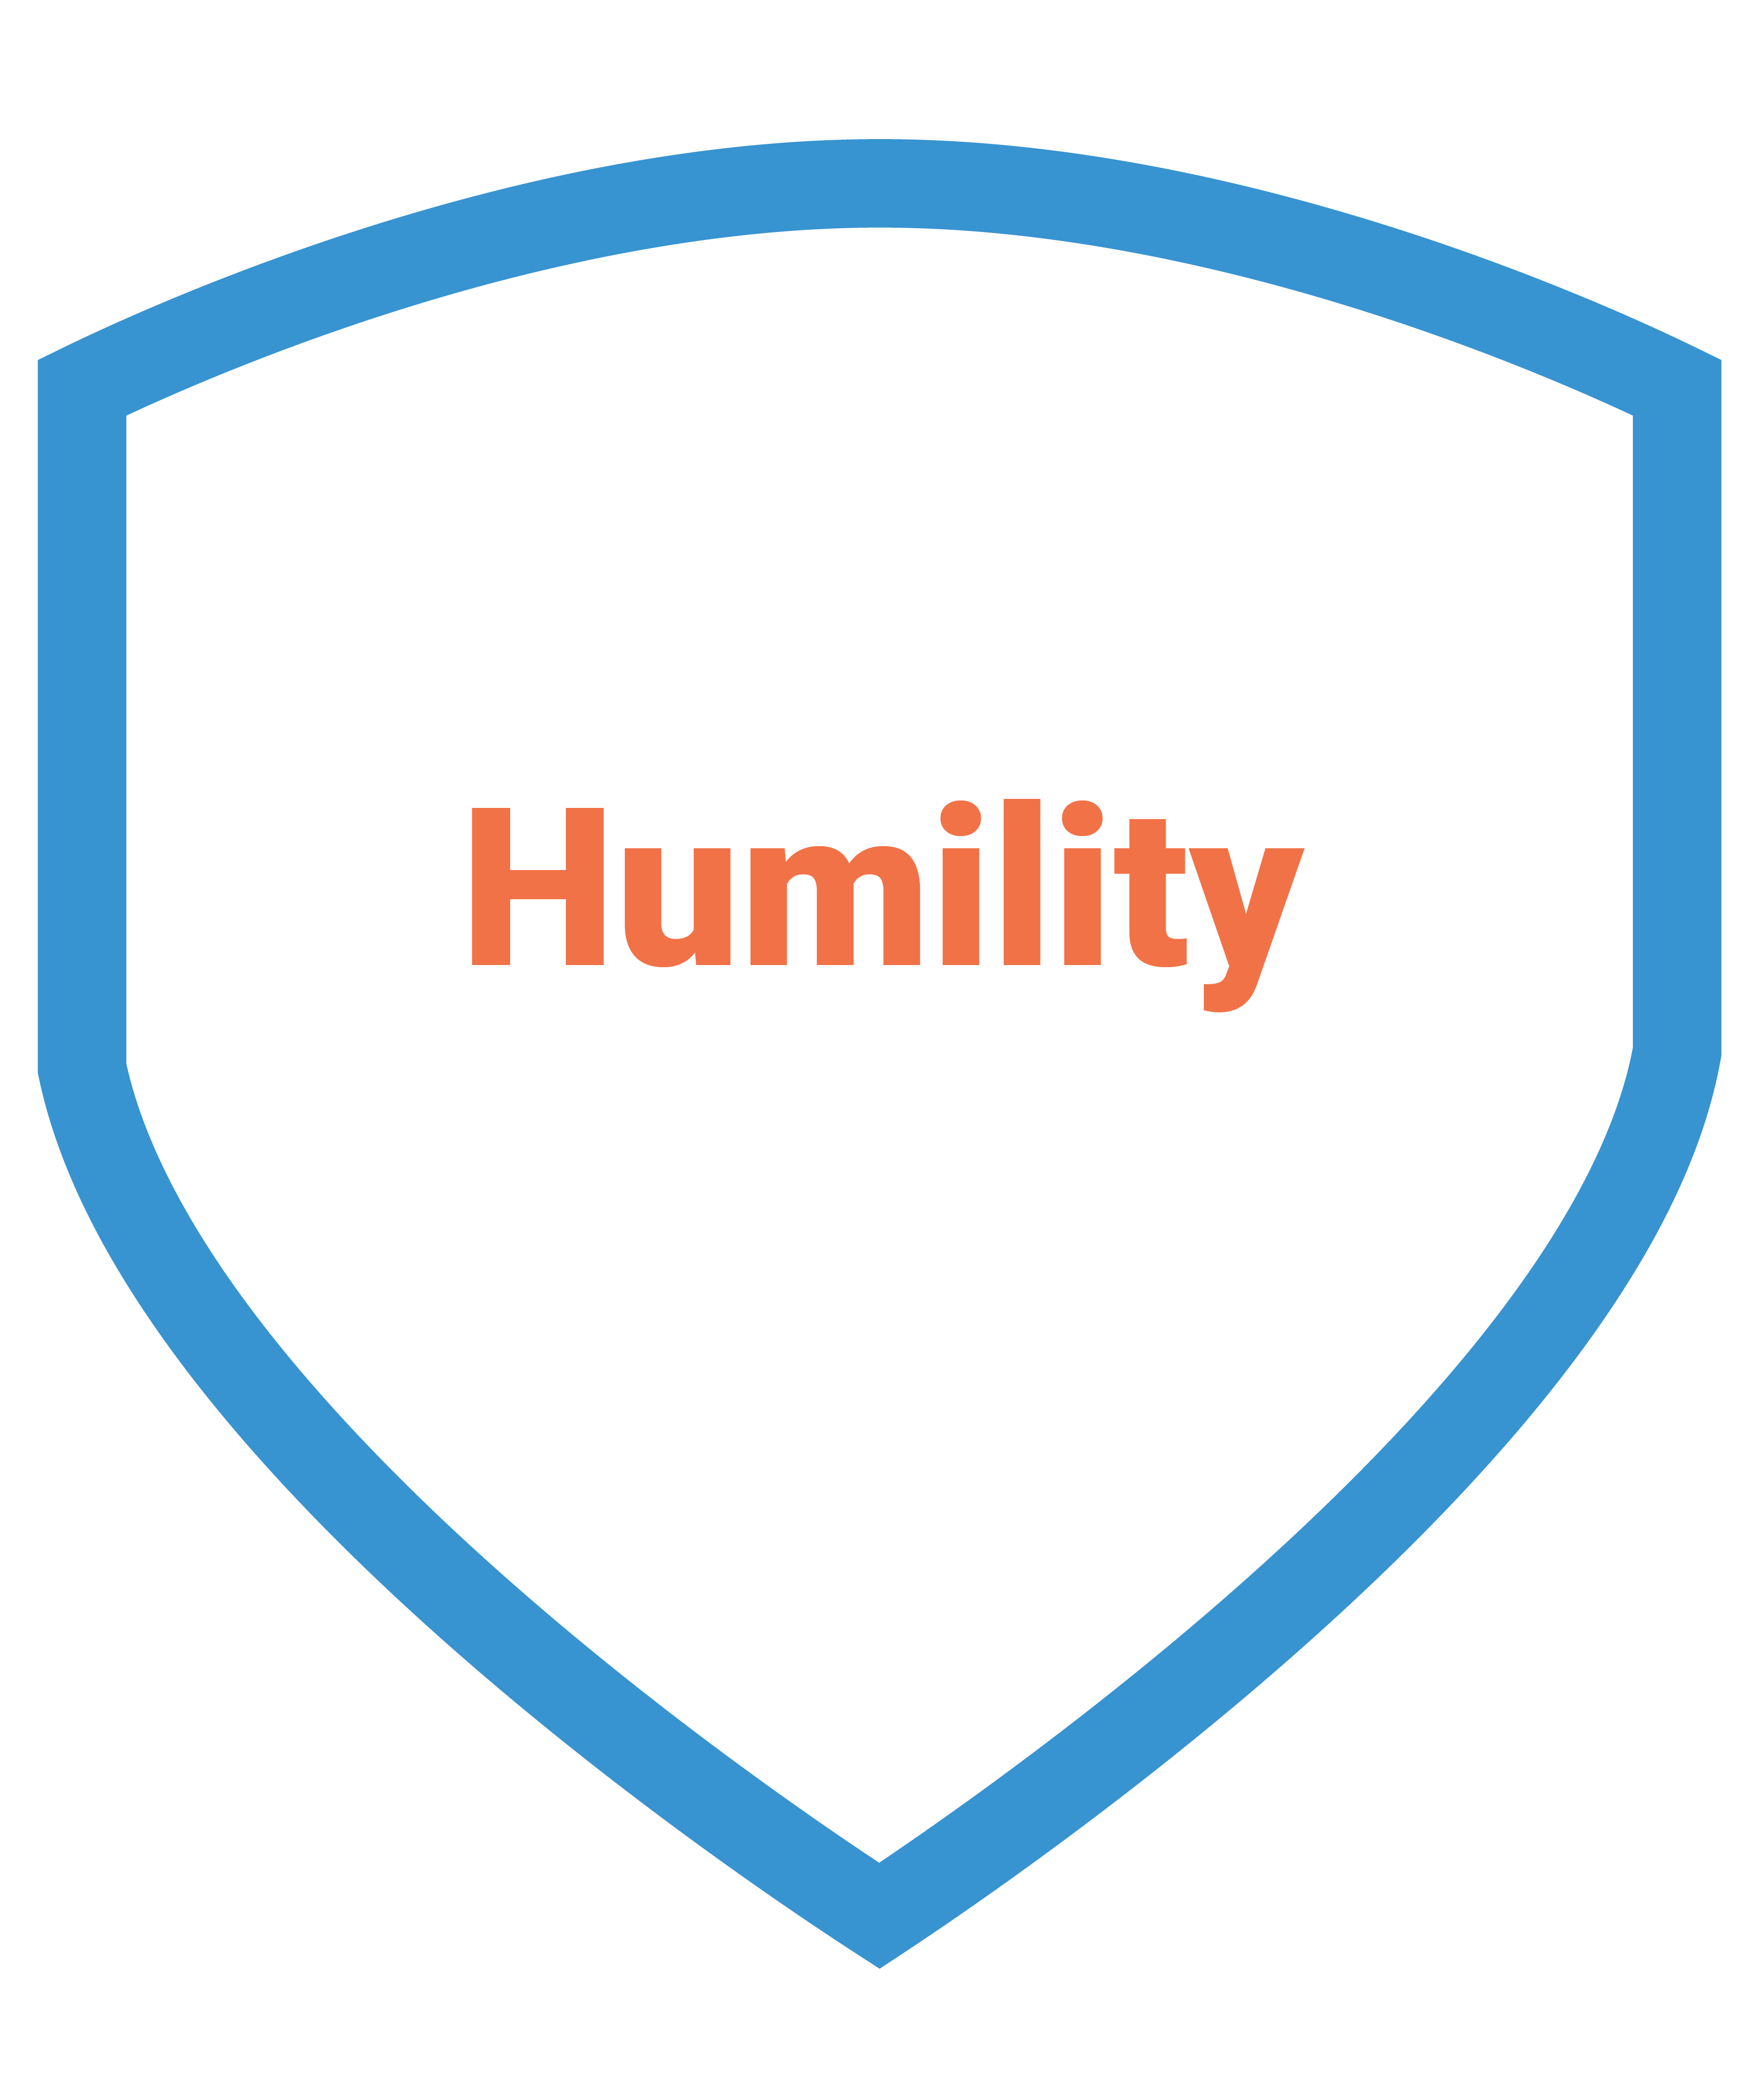 About the company - Our values - The word "Humility" in orange text surrounded by a blue shield outline.